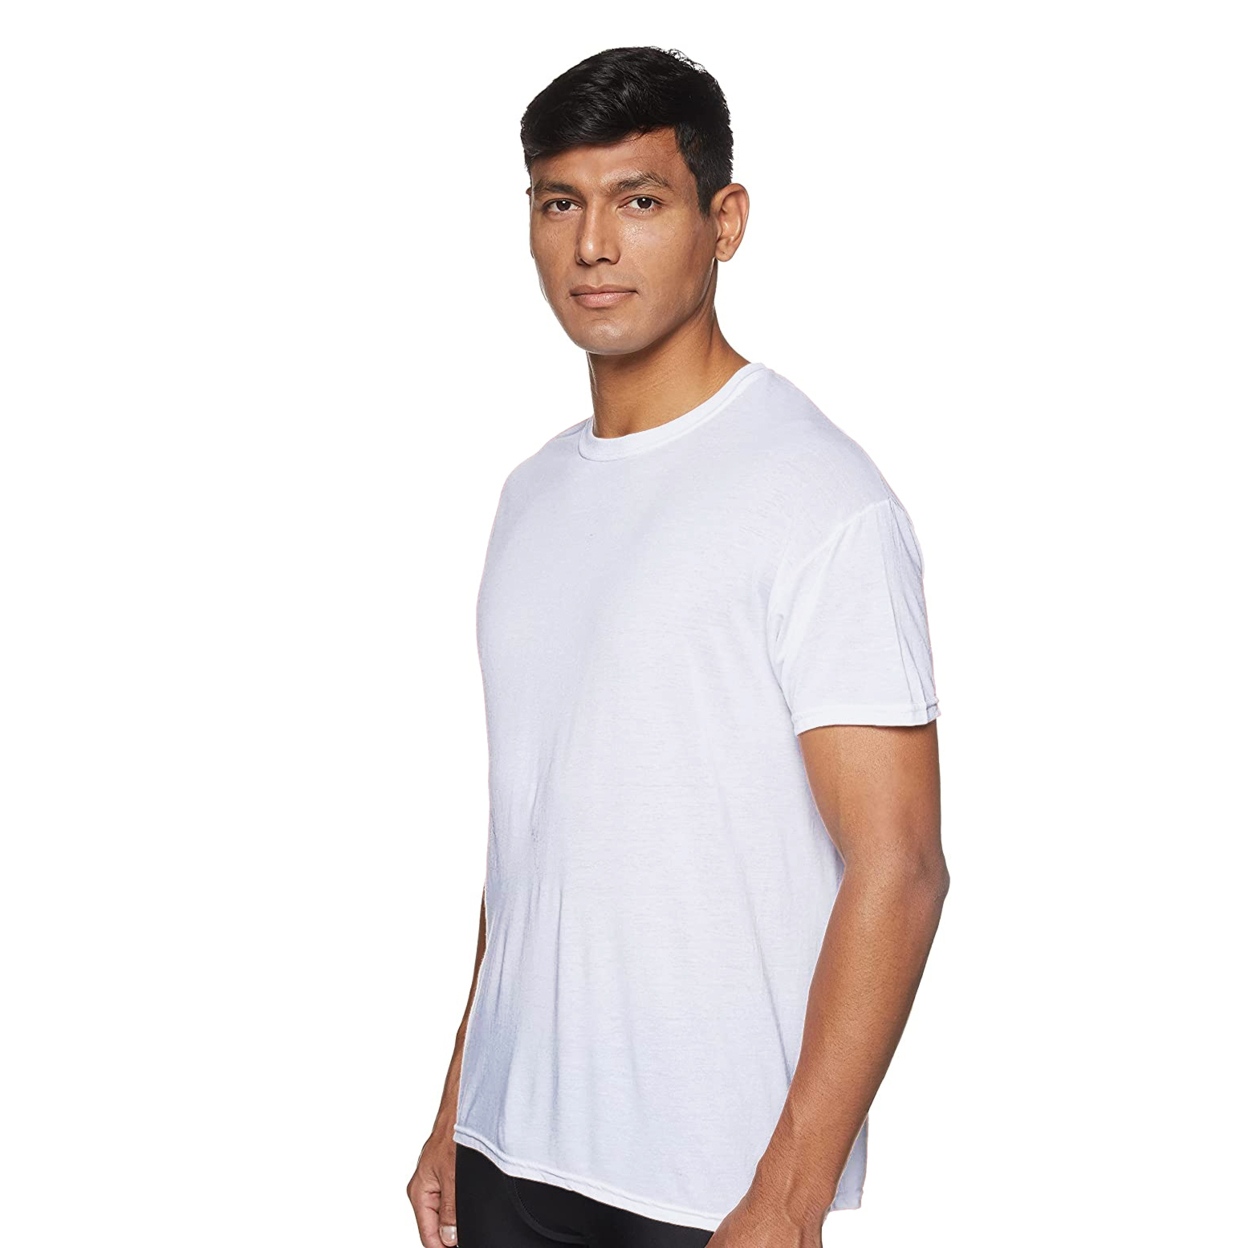 3-Pack: Men's Laviva Active Moisture Wicking Dry Fit Crew Neck Shirts - Assorted Colors, Medium